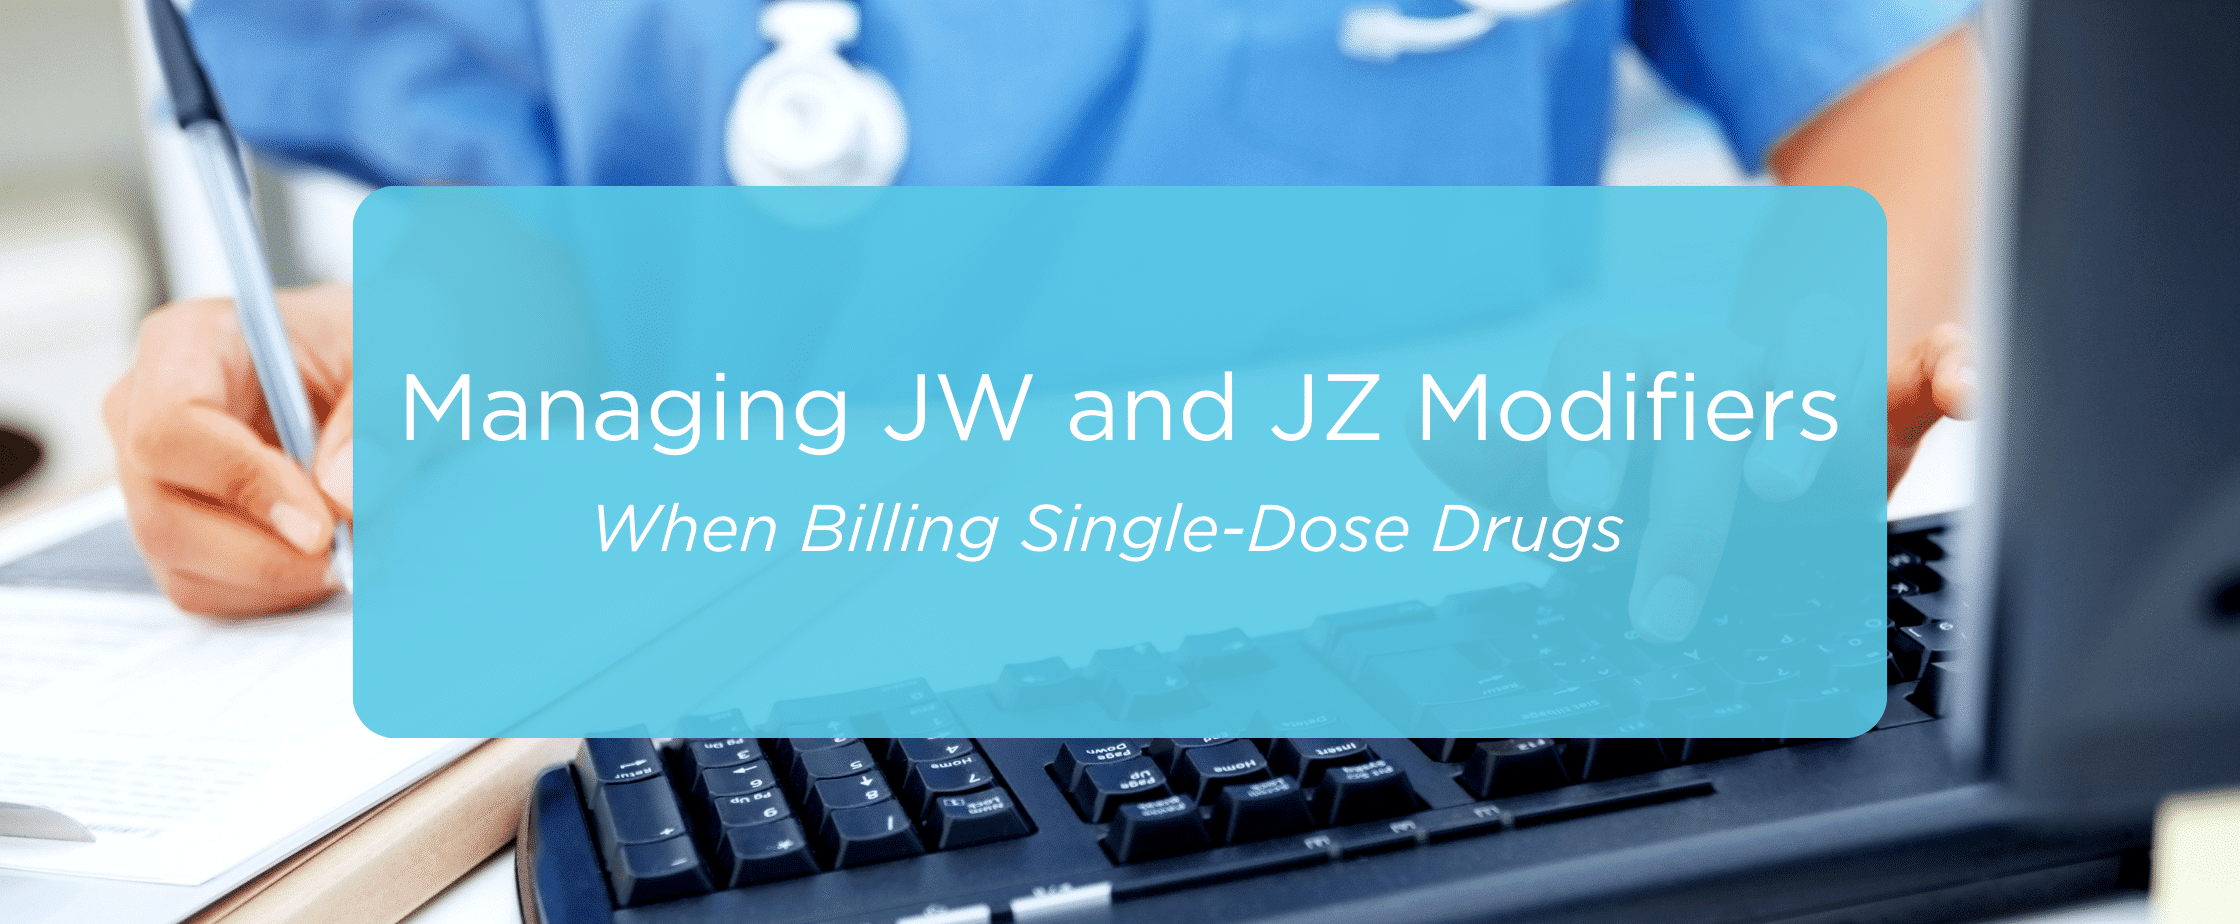 Featured image for Managing JW and JZ Modifiers When Billing Single-Dose Drugs